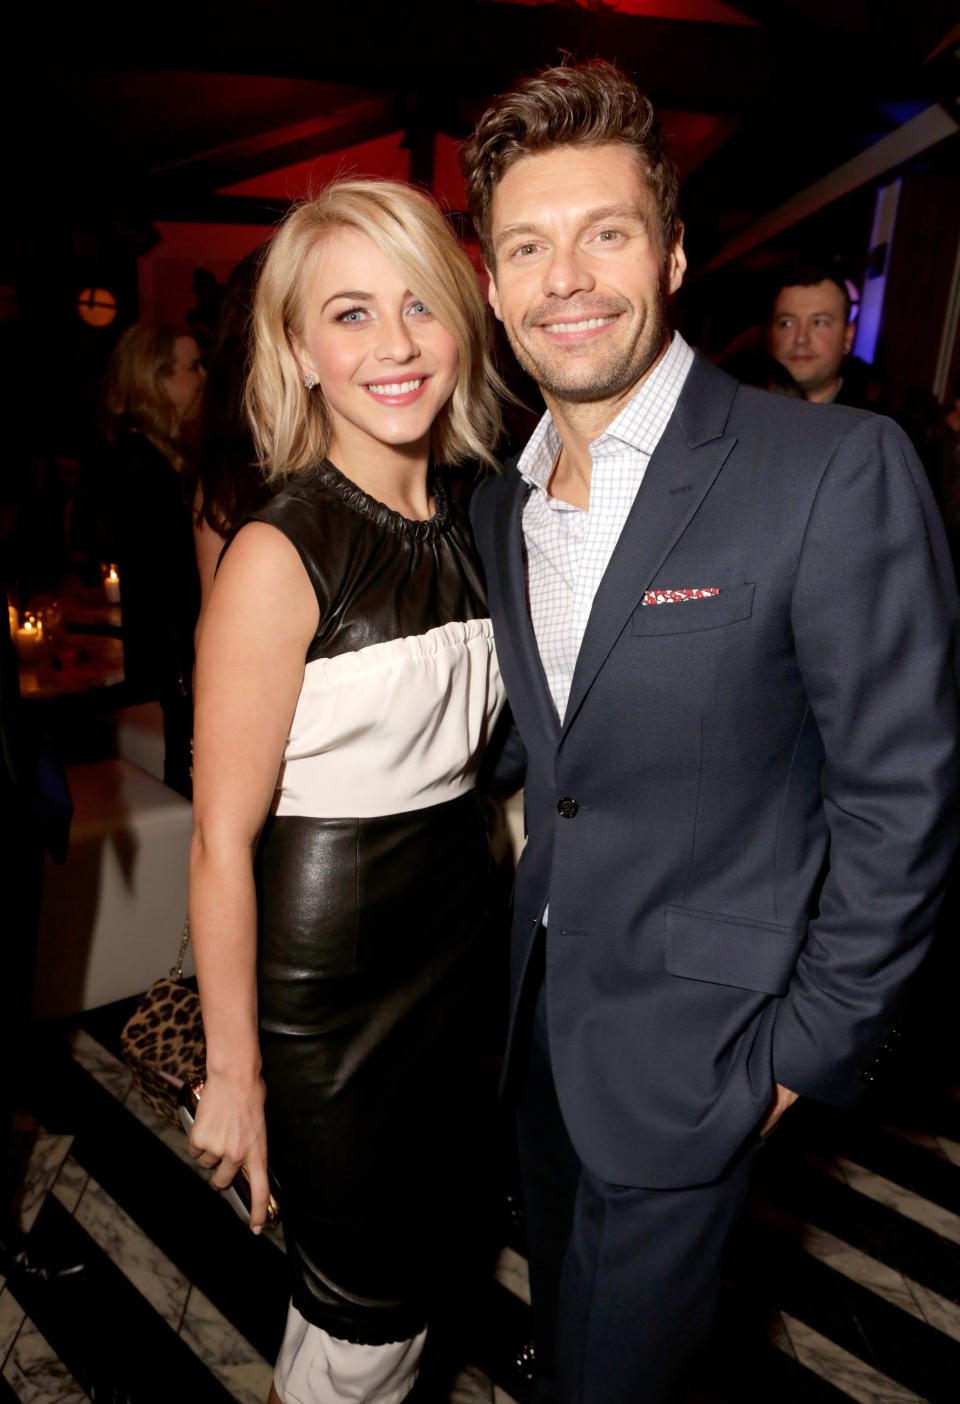 <a href="http://www.huffingtonpost.com/2013/03/16/ryan-seacrest-julianne-hough-split_n_2890436.html" target="_blank">Things were over in June</a> for Julianne Hough and Ryan Seacrest, after dating for close to three years. 